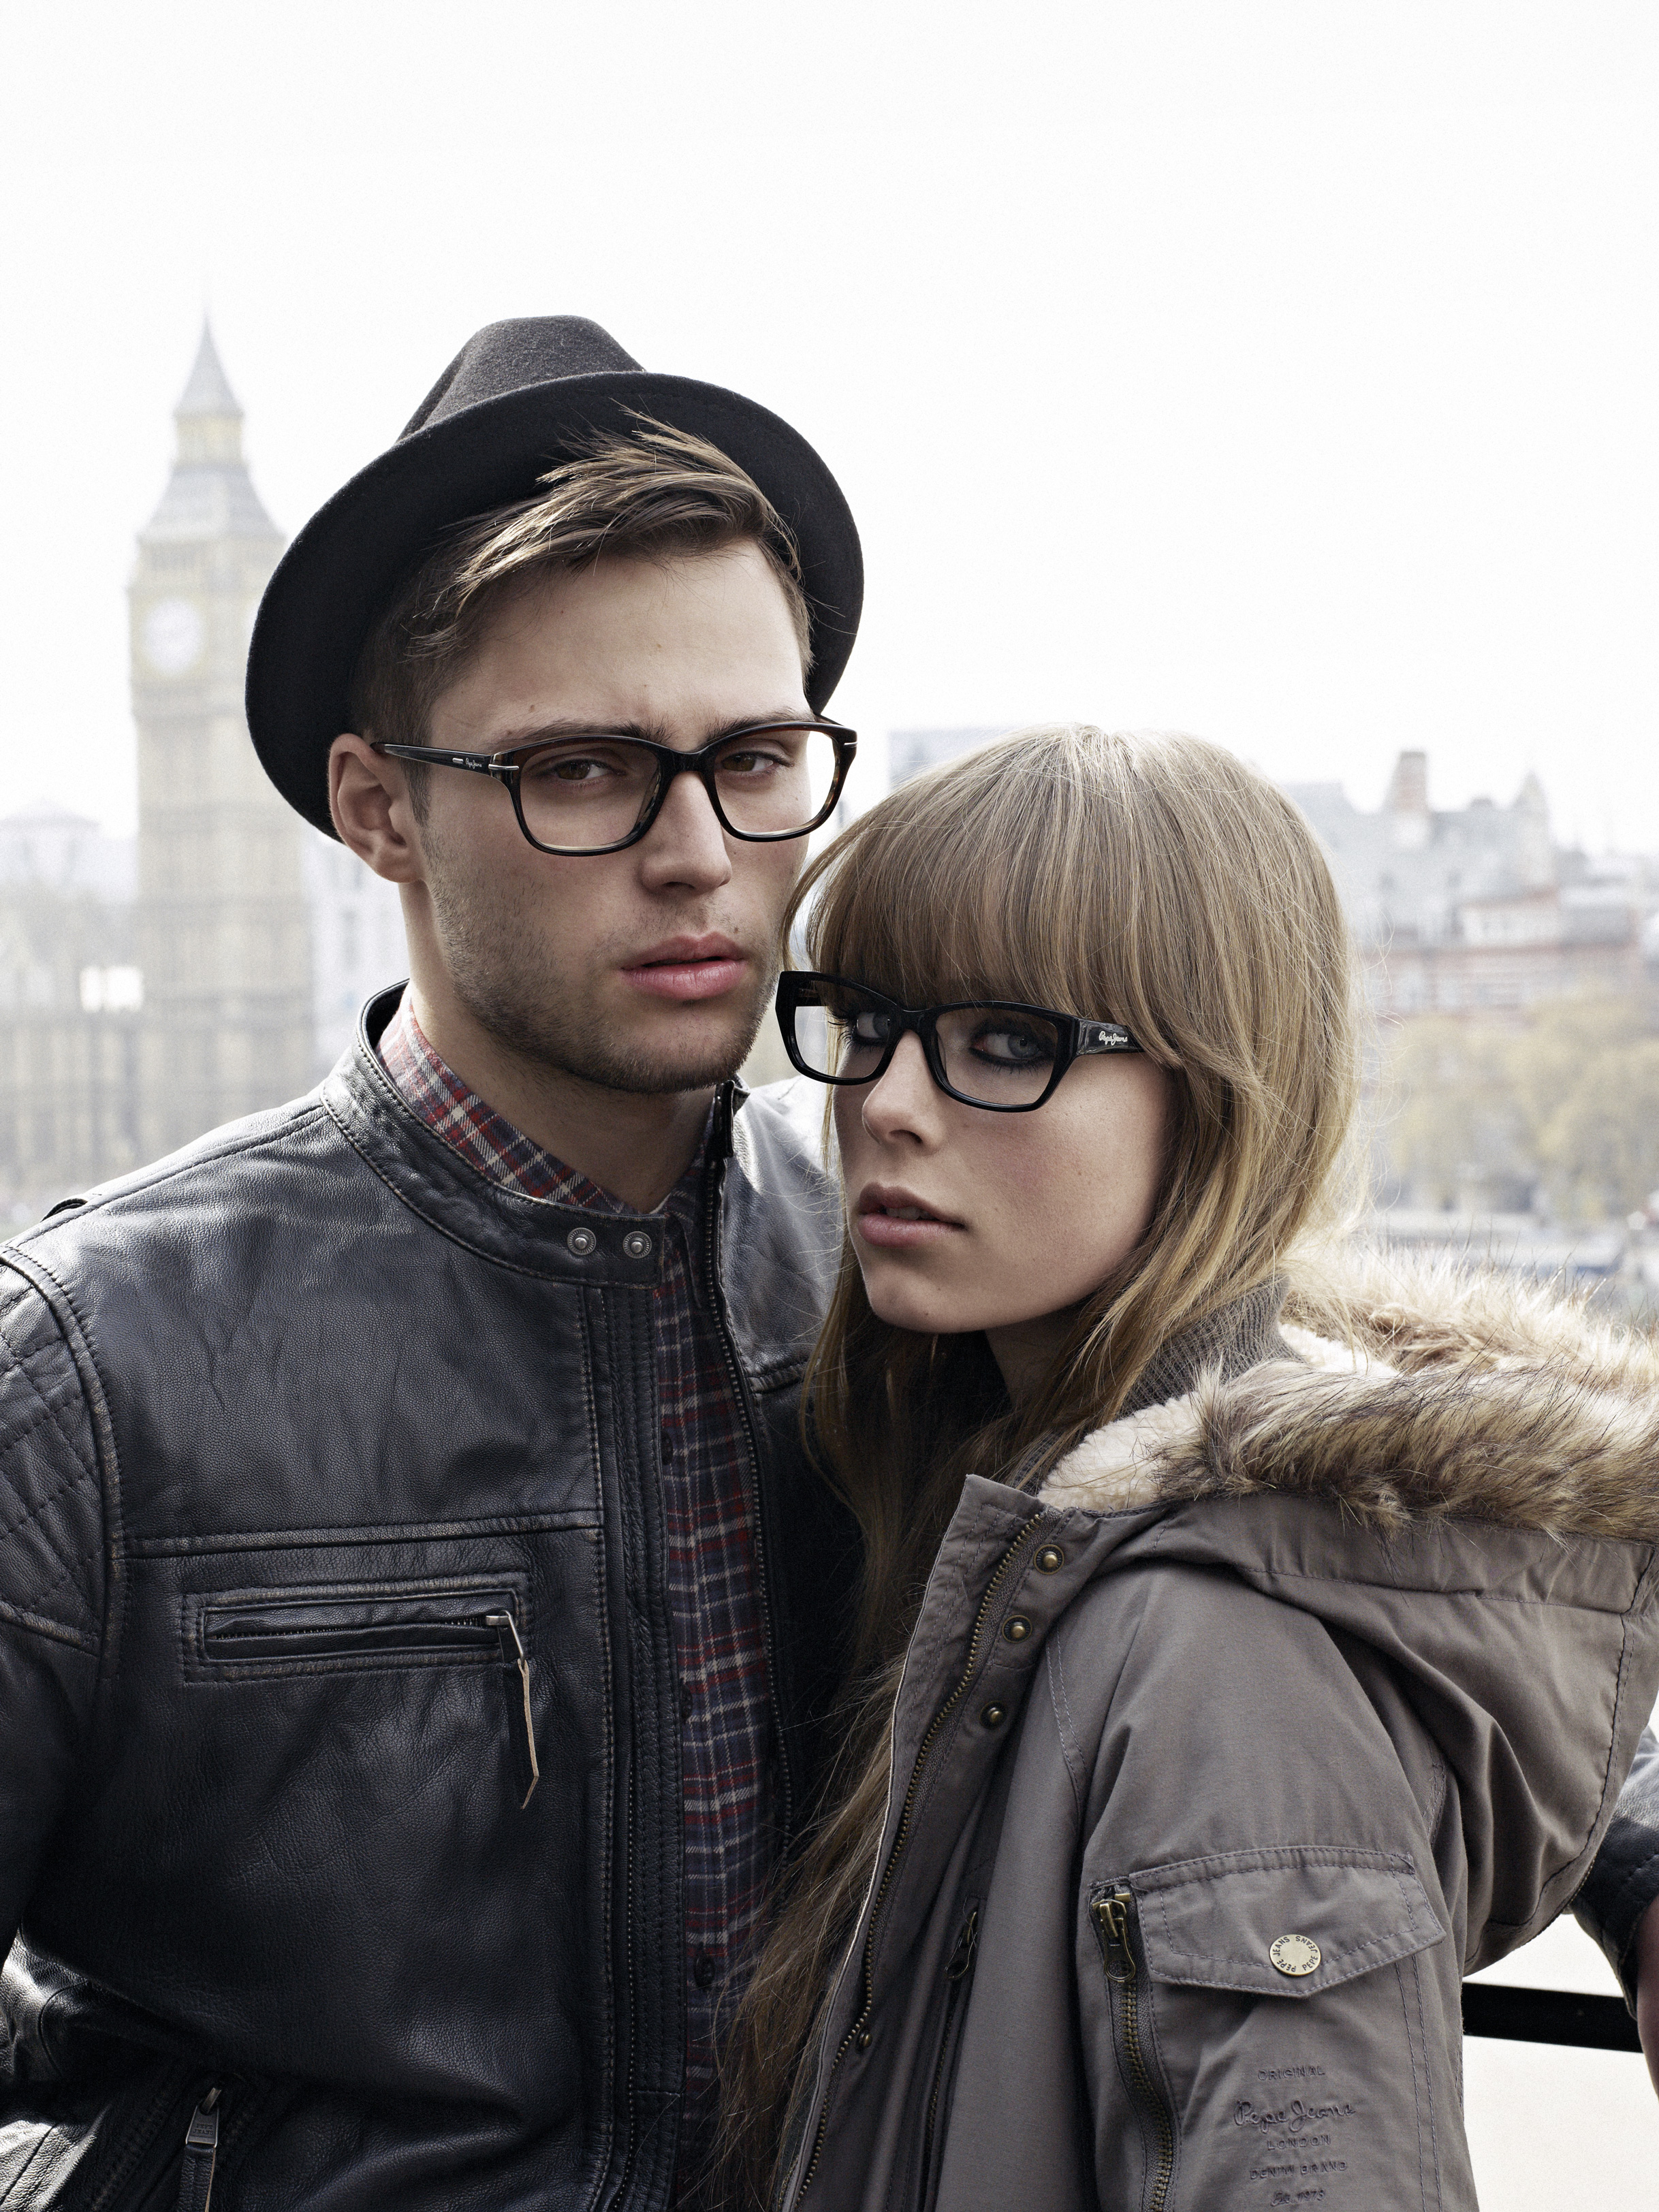 Pepe Jeans AW 2012 Ad Campaign 6